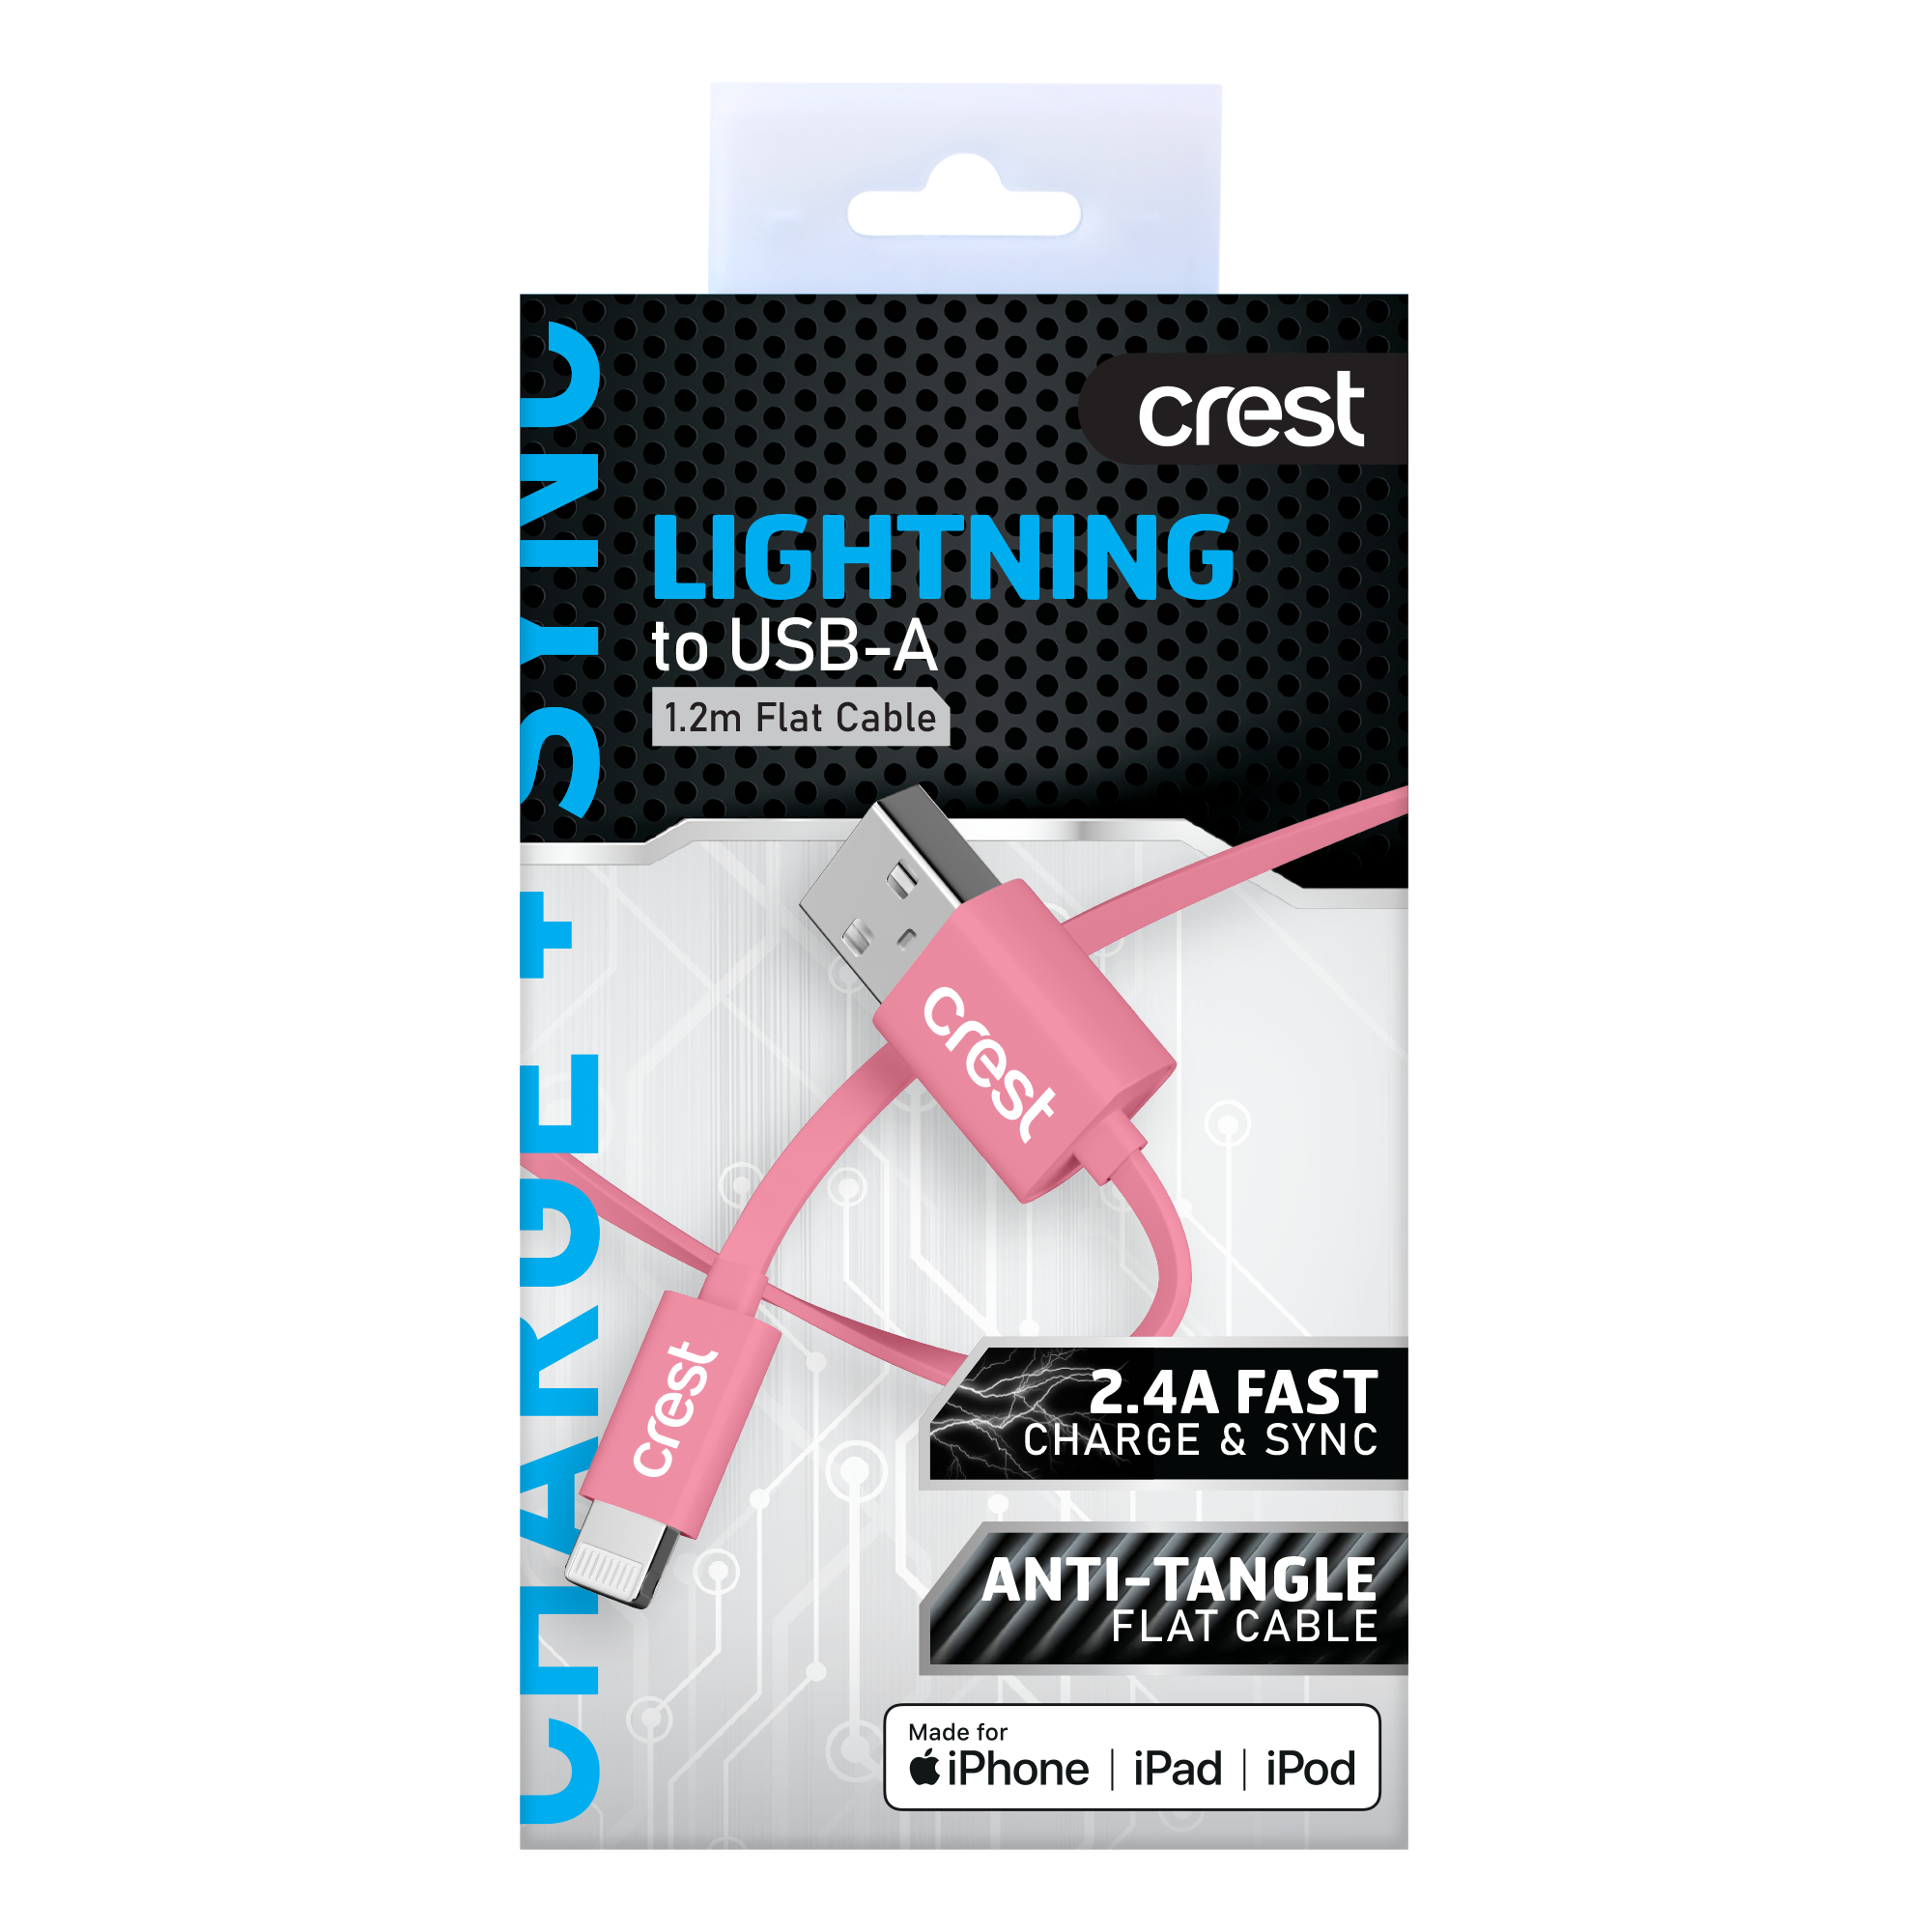 Lightning to USB-A Flat Cable 1.2M - Pink